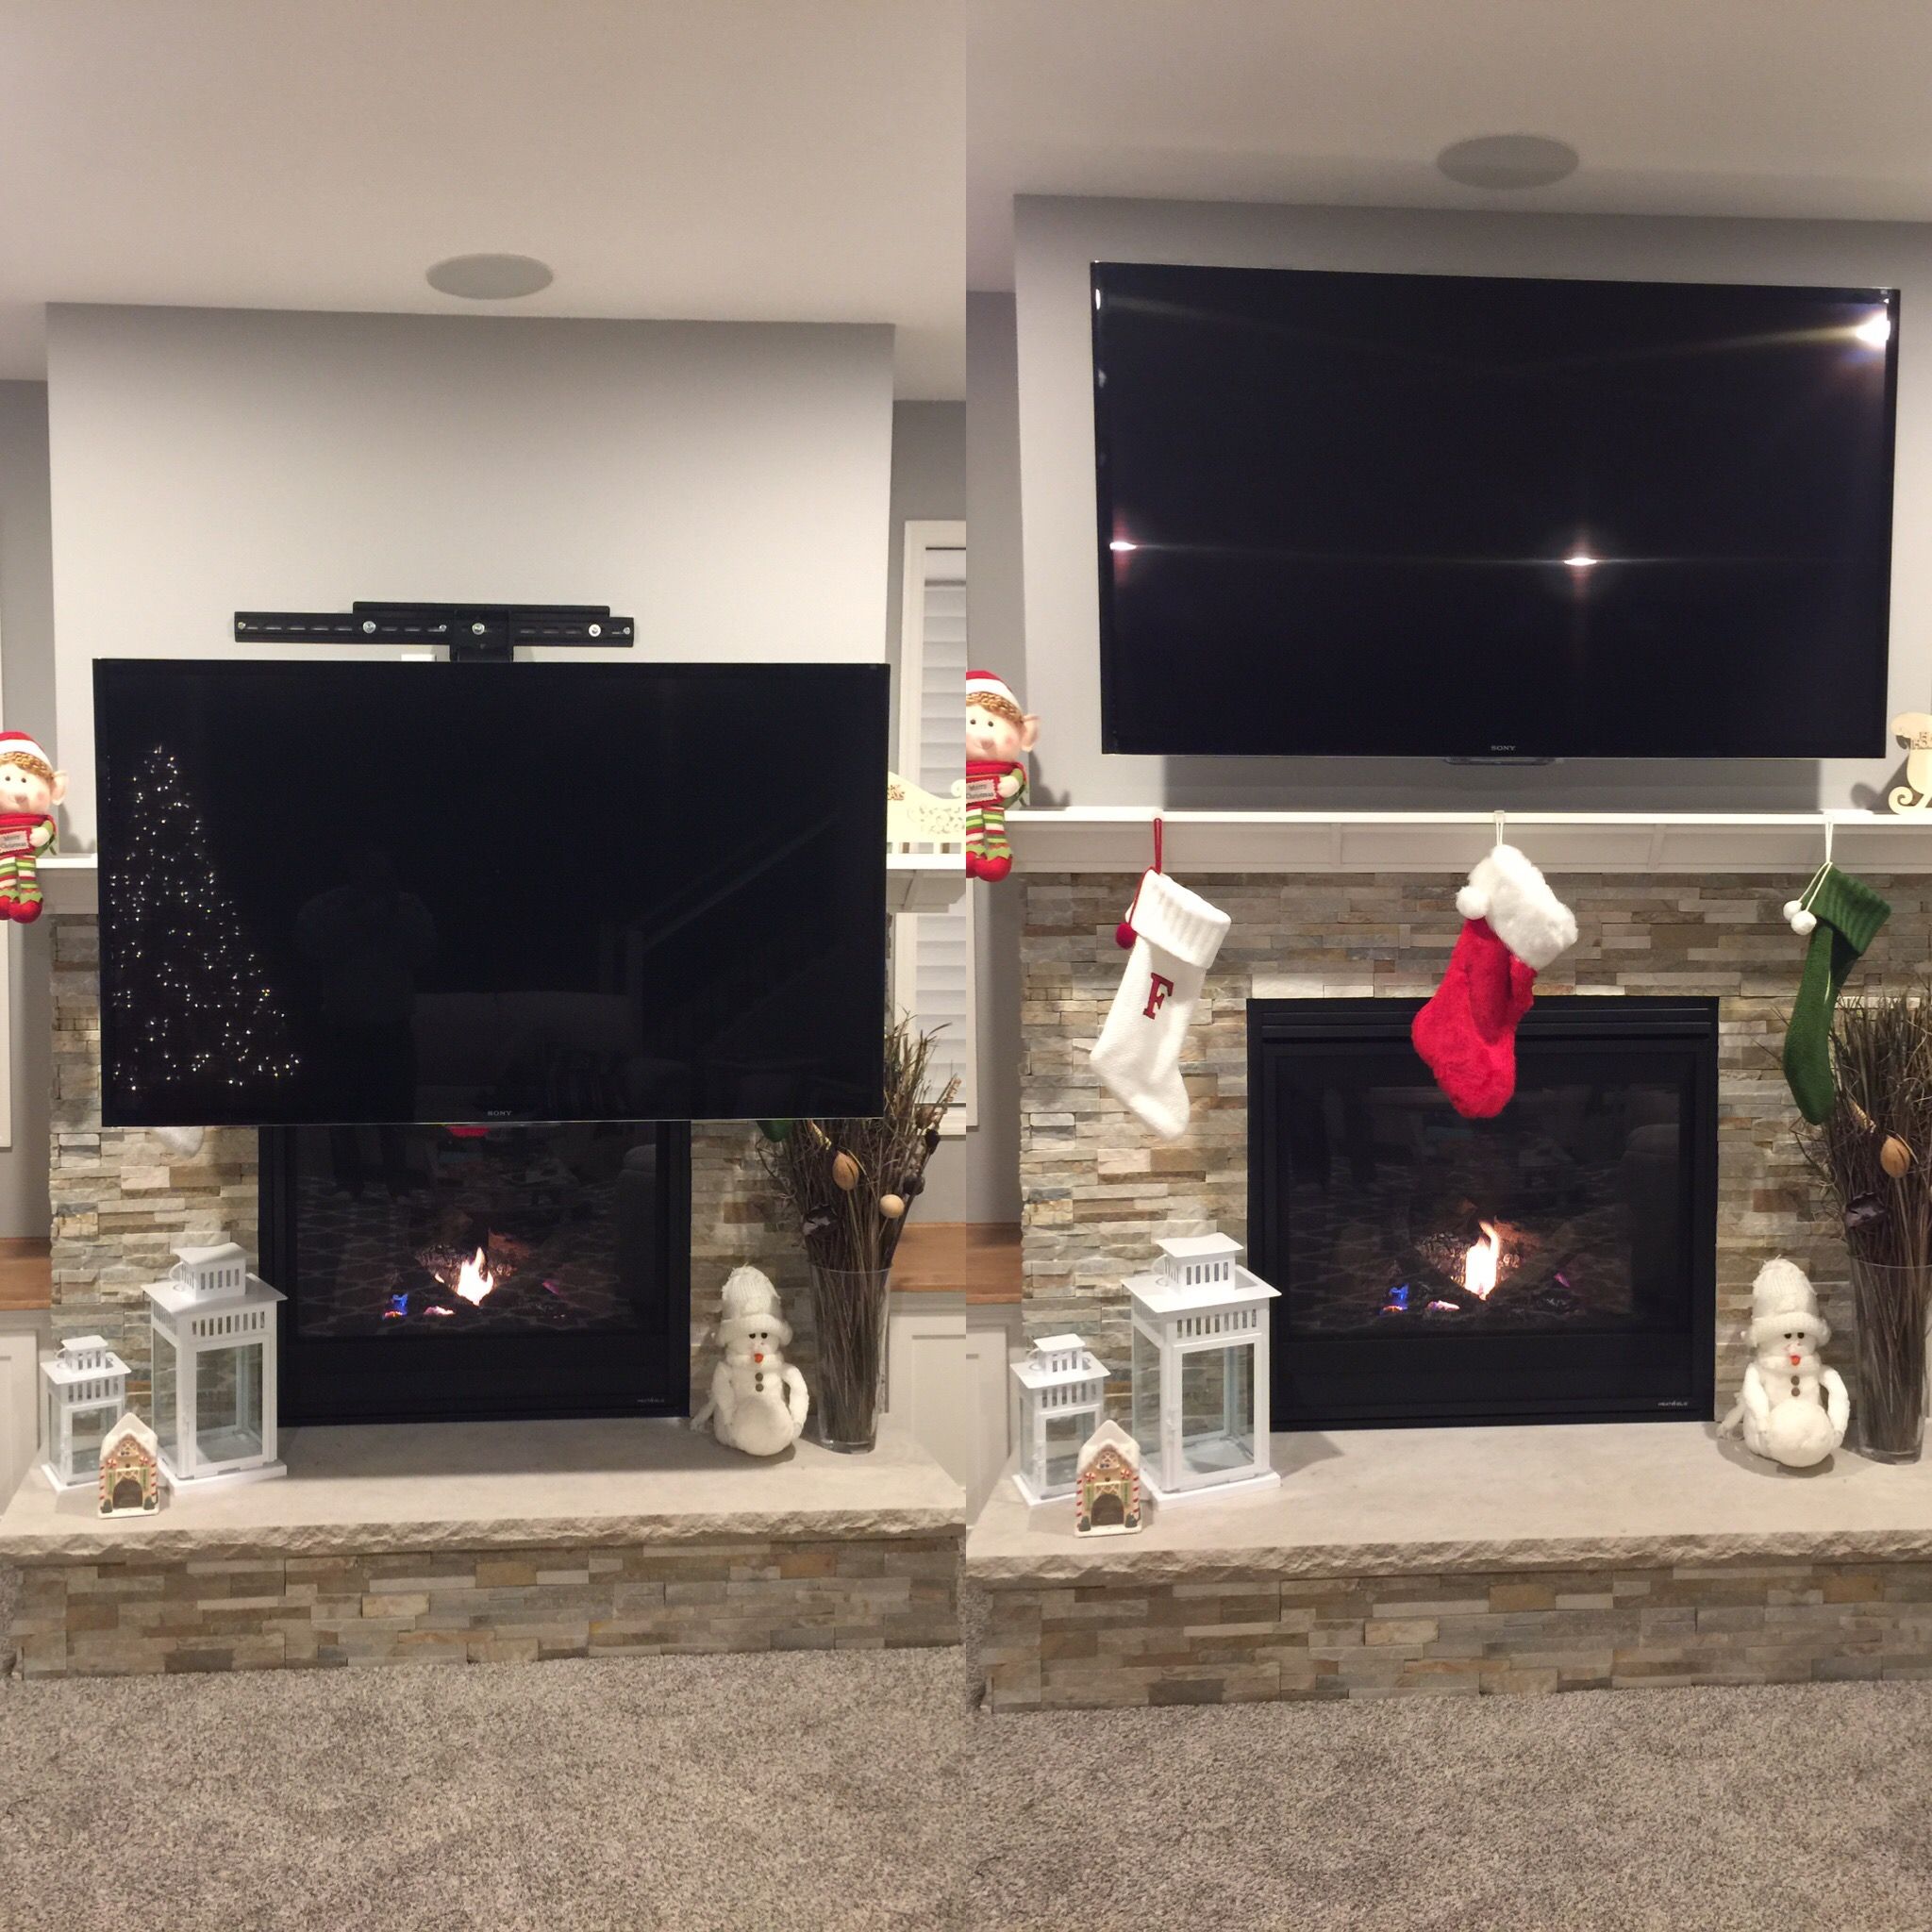 Mount It Fireplace Tv Mount Awesome 49 Best Dynamic Mount Bracket Images In 2019